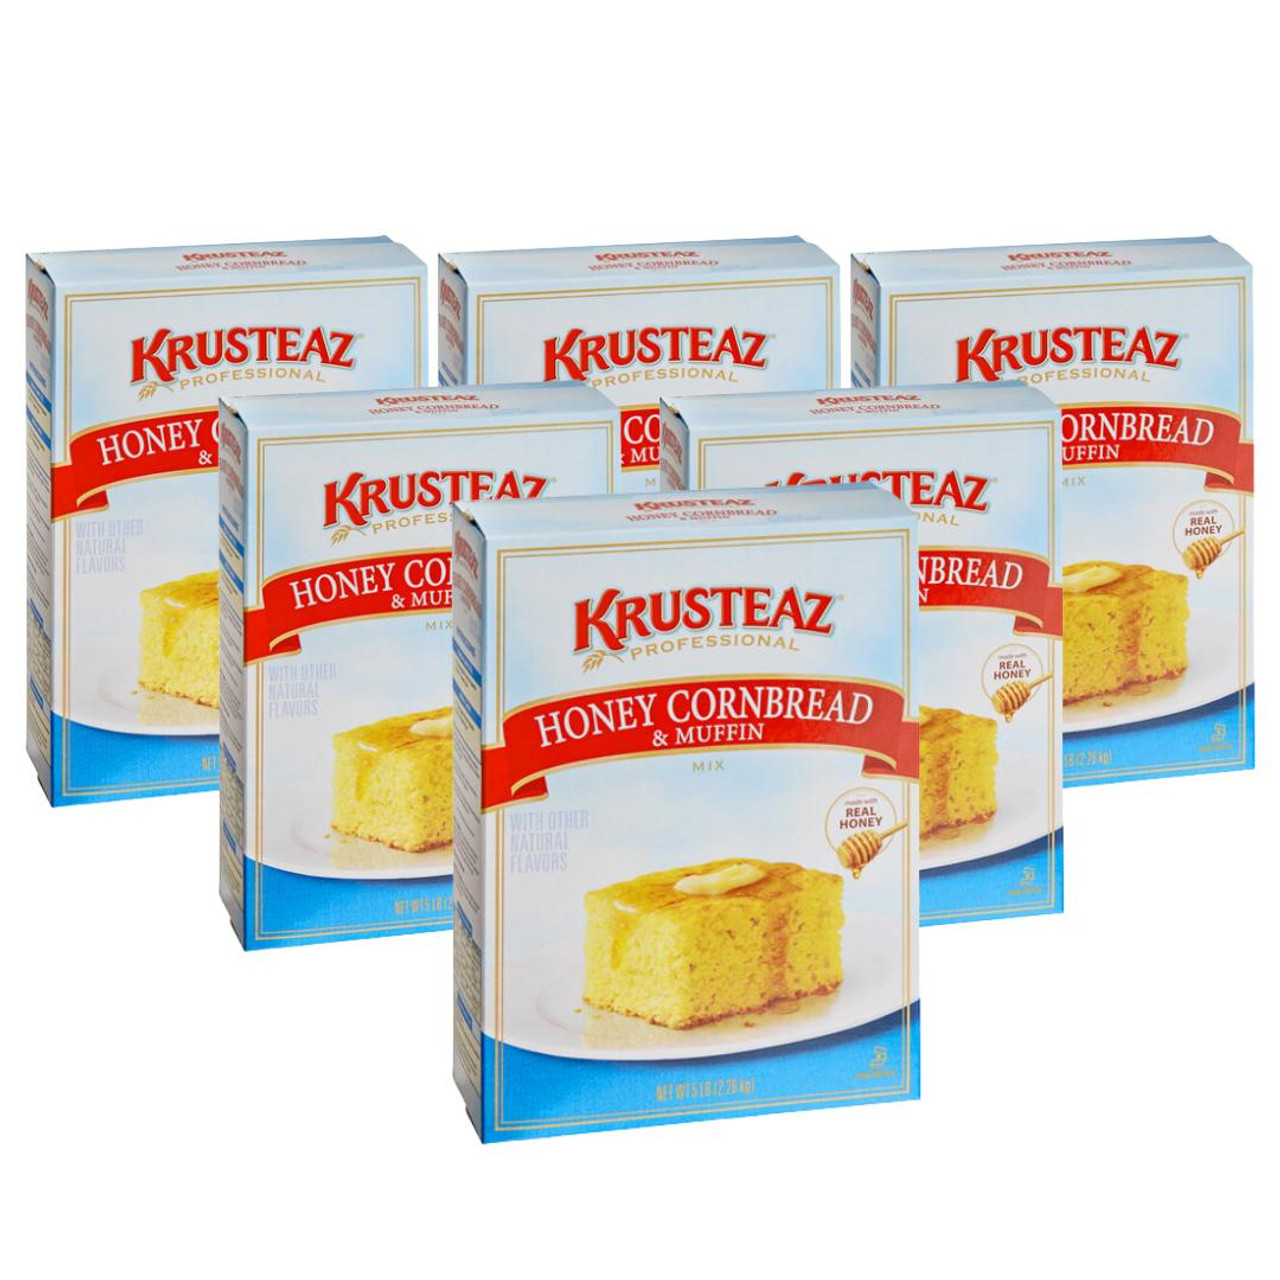 https://cdn11.bigcommerce.com/s-g5ygv2at8j/images/stencil/1280x1280/products/14141/29537/krusteaz-krusteaz-professional-honey-cornbread-and-muffin-mix-5-lbs2.26-kgs-6case__79857.1688347631.jpg?c=1